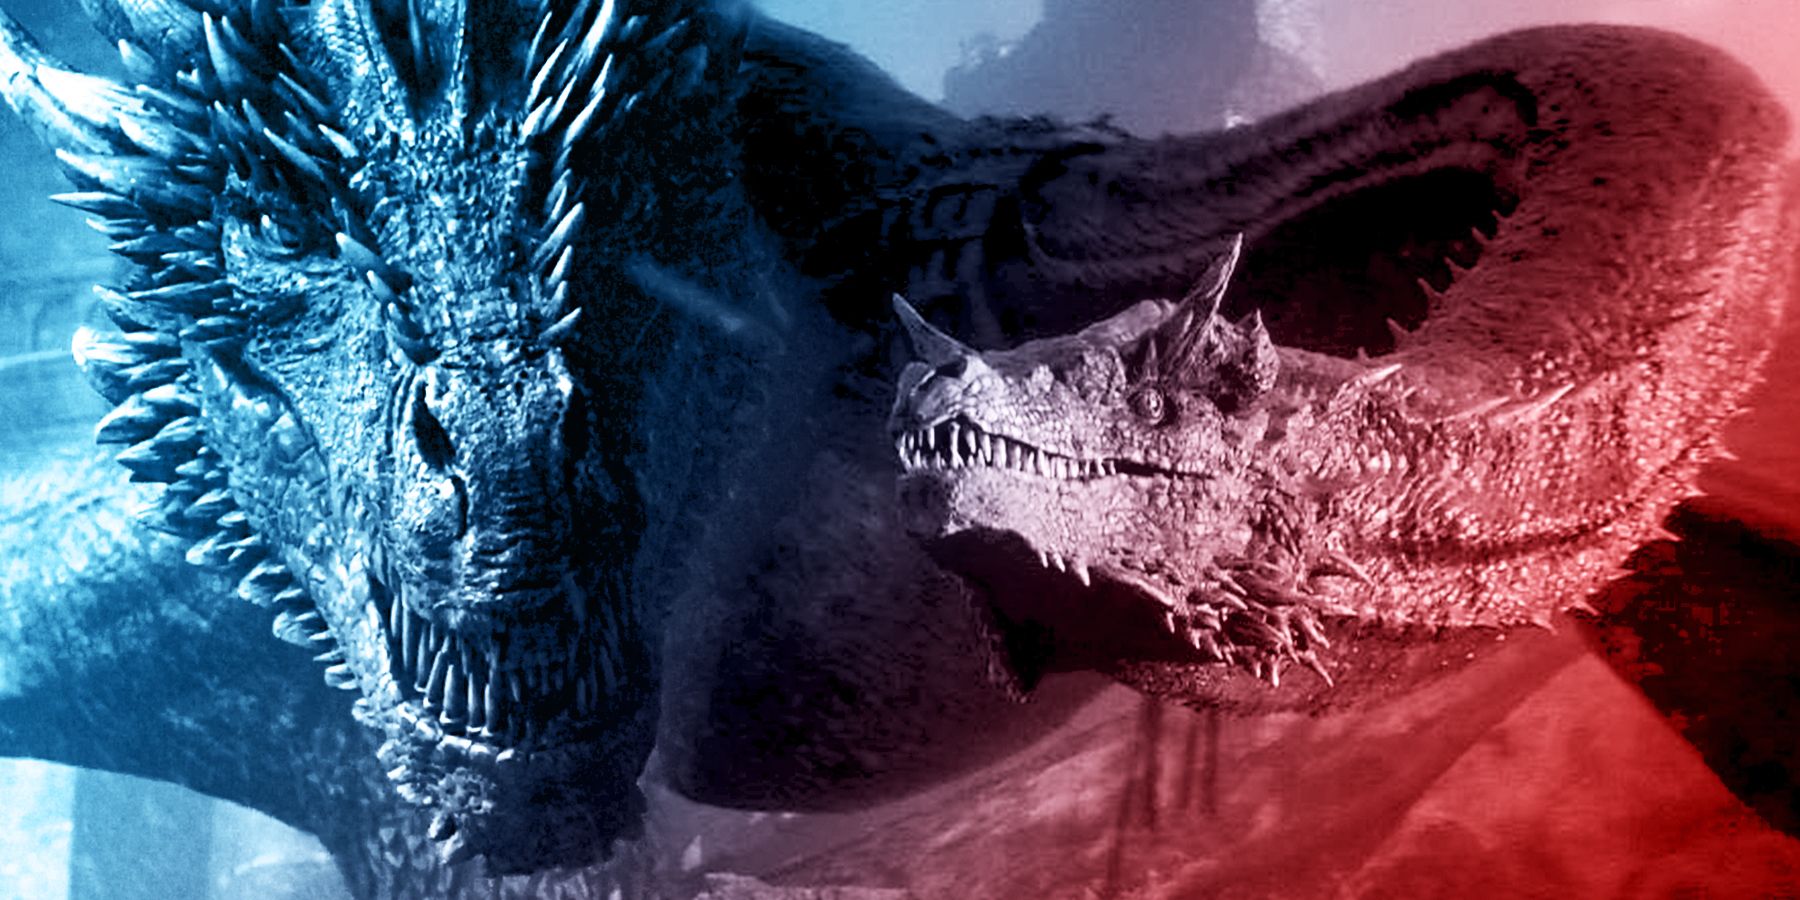 What are the dragons' names in Game of Thrones?